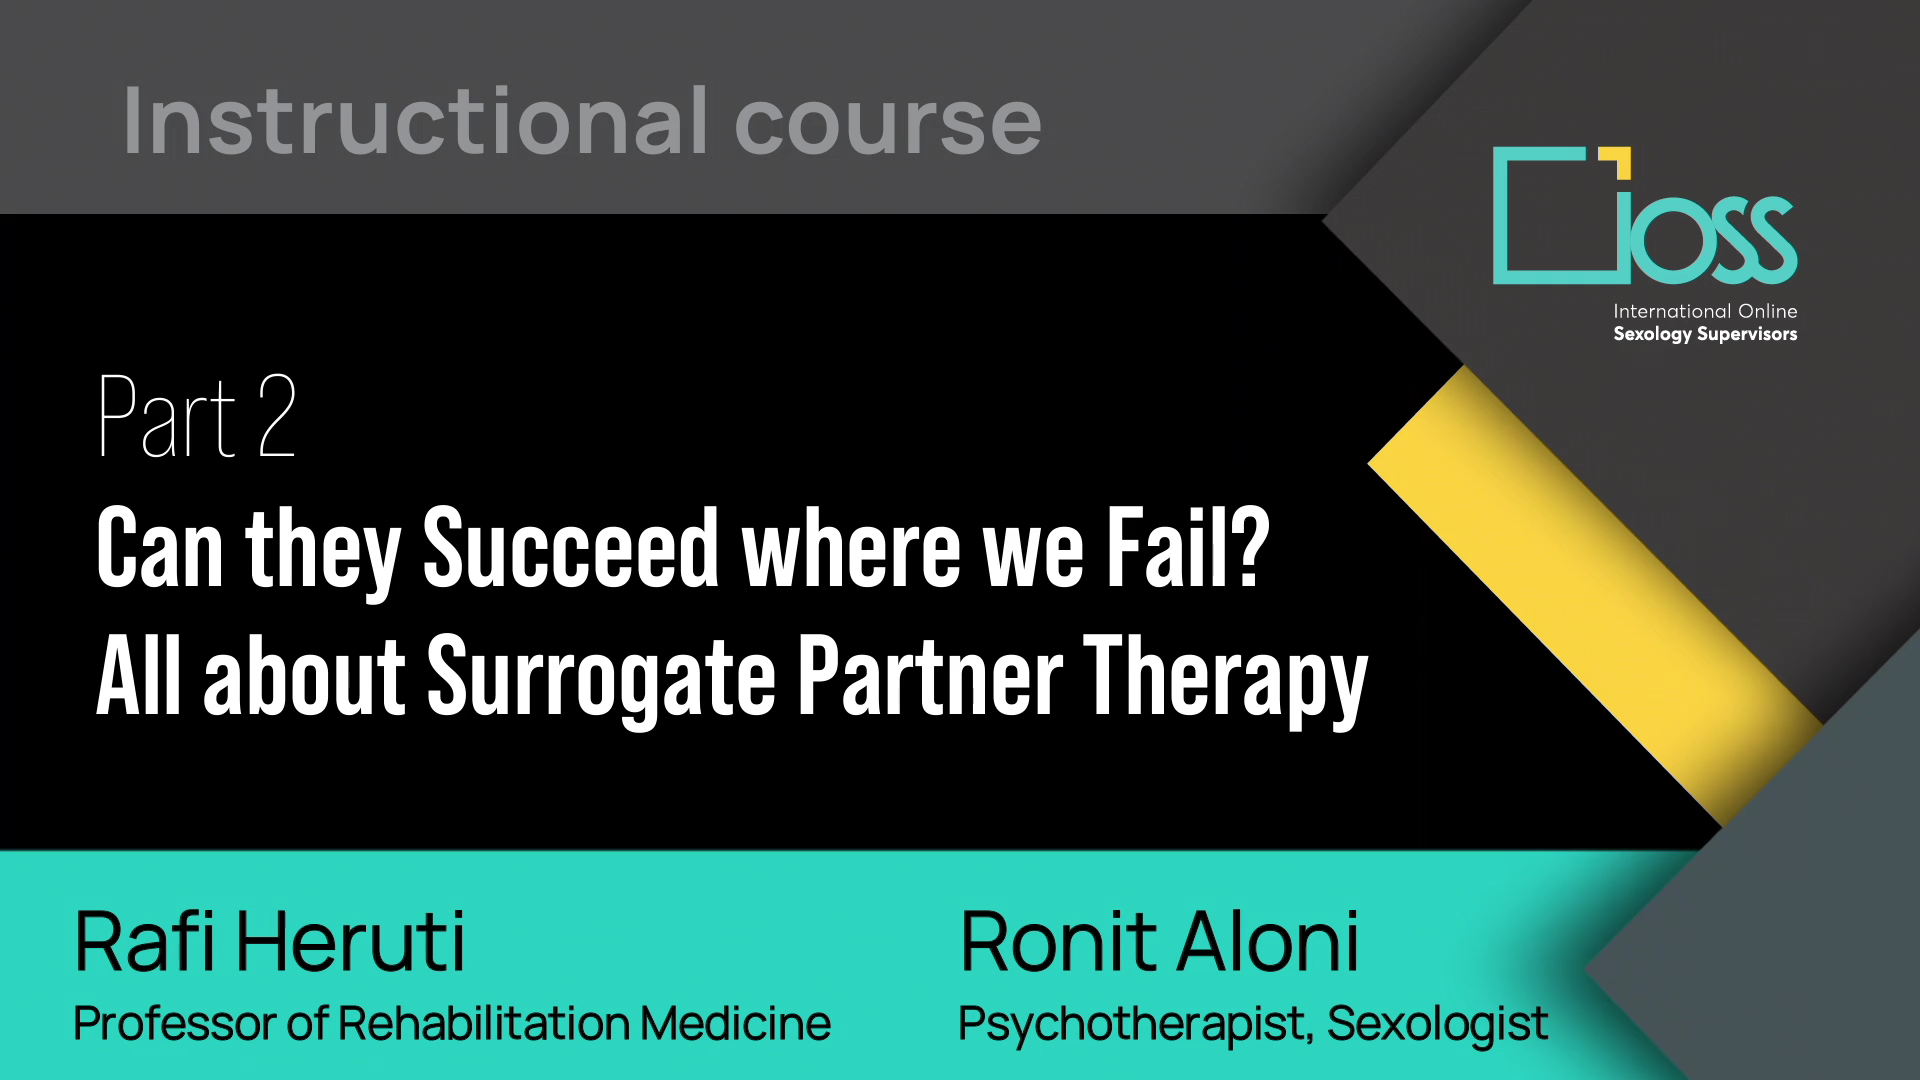 Part 2 Can they Succeed where we Fail: All about Surrogate Partner Therapy (Part 1 & 2)